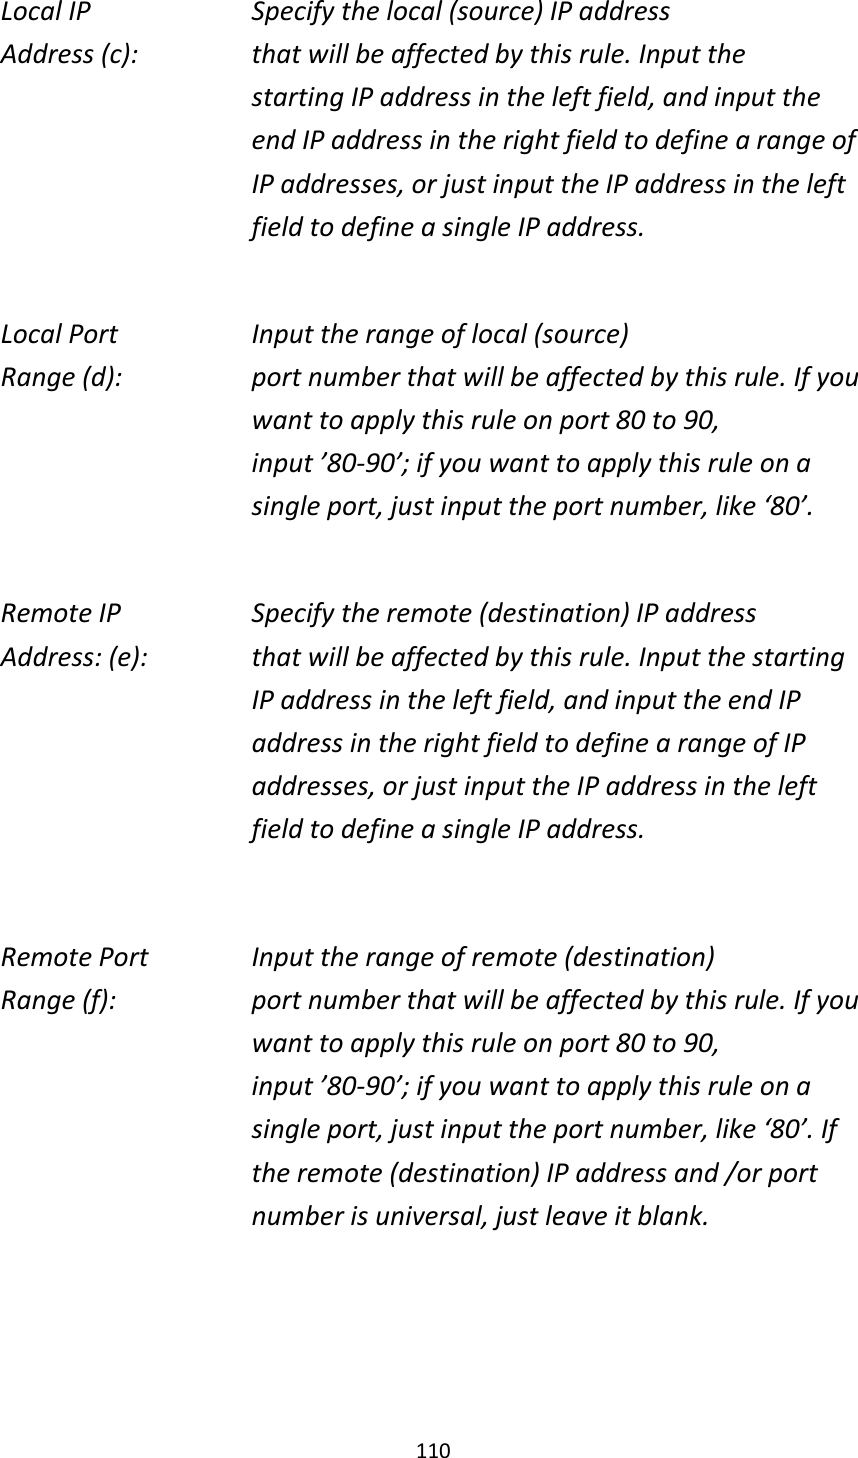 110 Local IP        Specify the local (source) IP address Address (c):      that will be affected by this rule. Input the starting IP address in the left field, and input the end IP address in the right field to define a range of IP addresses, or just input the IP address in the left field to define a single IP address.  Local Port        Input the range of local (source) Range (d):    port number that will be affected by this rule. If you want to apply this rule on port 80 to 90, input ’80-90’; if you want to apply this rule on a single port, just input the port number, like ‘80’.  Remote IP        Specify the remote (destination) IP address Address: (e):    that will be affected by this rule. Input the starting IP address in the left field, and input the end IP address in the right field to define a range of IP addresses, or just input the IP address in the left field to define a single IP address.  Remote Port      Input the range of remote (destination) Range (f):  port number that will be affected by this rule. If you want to apply this rule on port 80 to 90, input ’80-90’; if you want to apply this rule on a single port, just input the port number, like ‘80’. If the remote (destination) IP address and /or port number is universal, just leave it blank.    